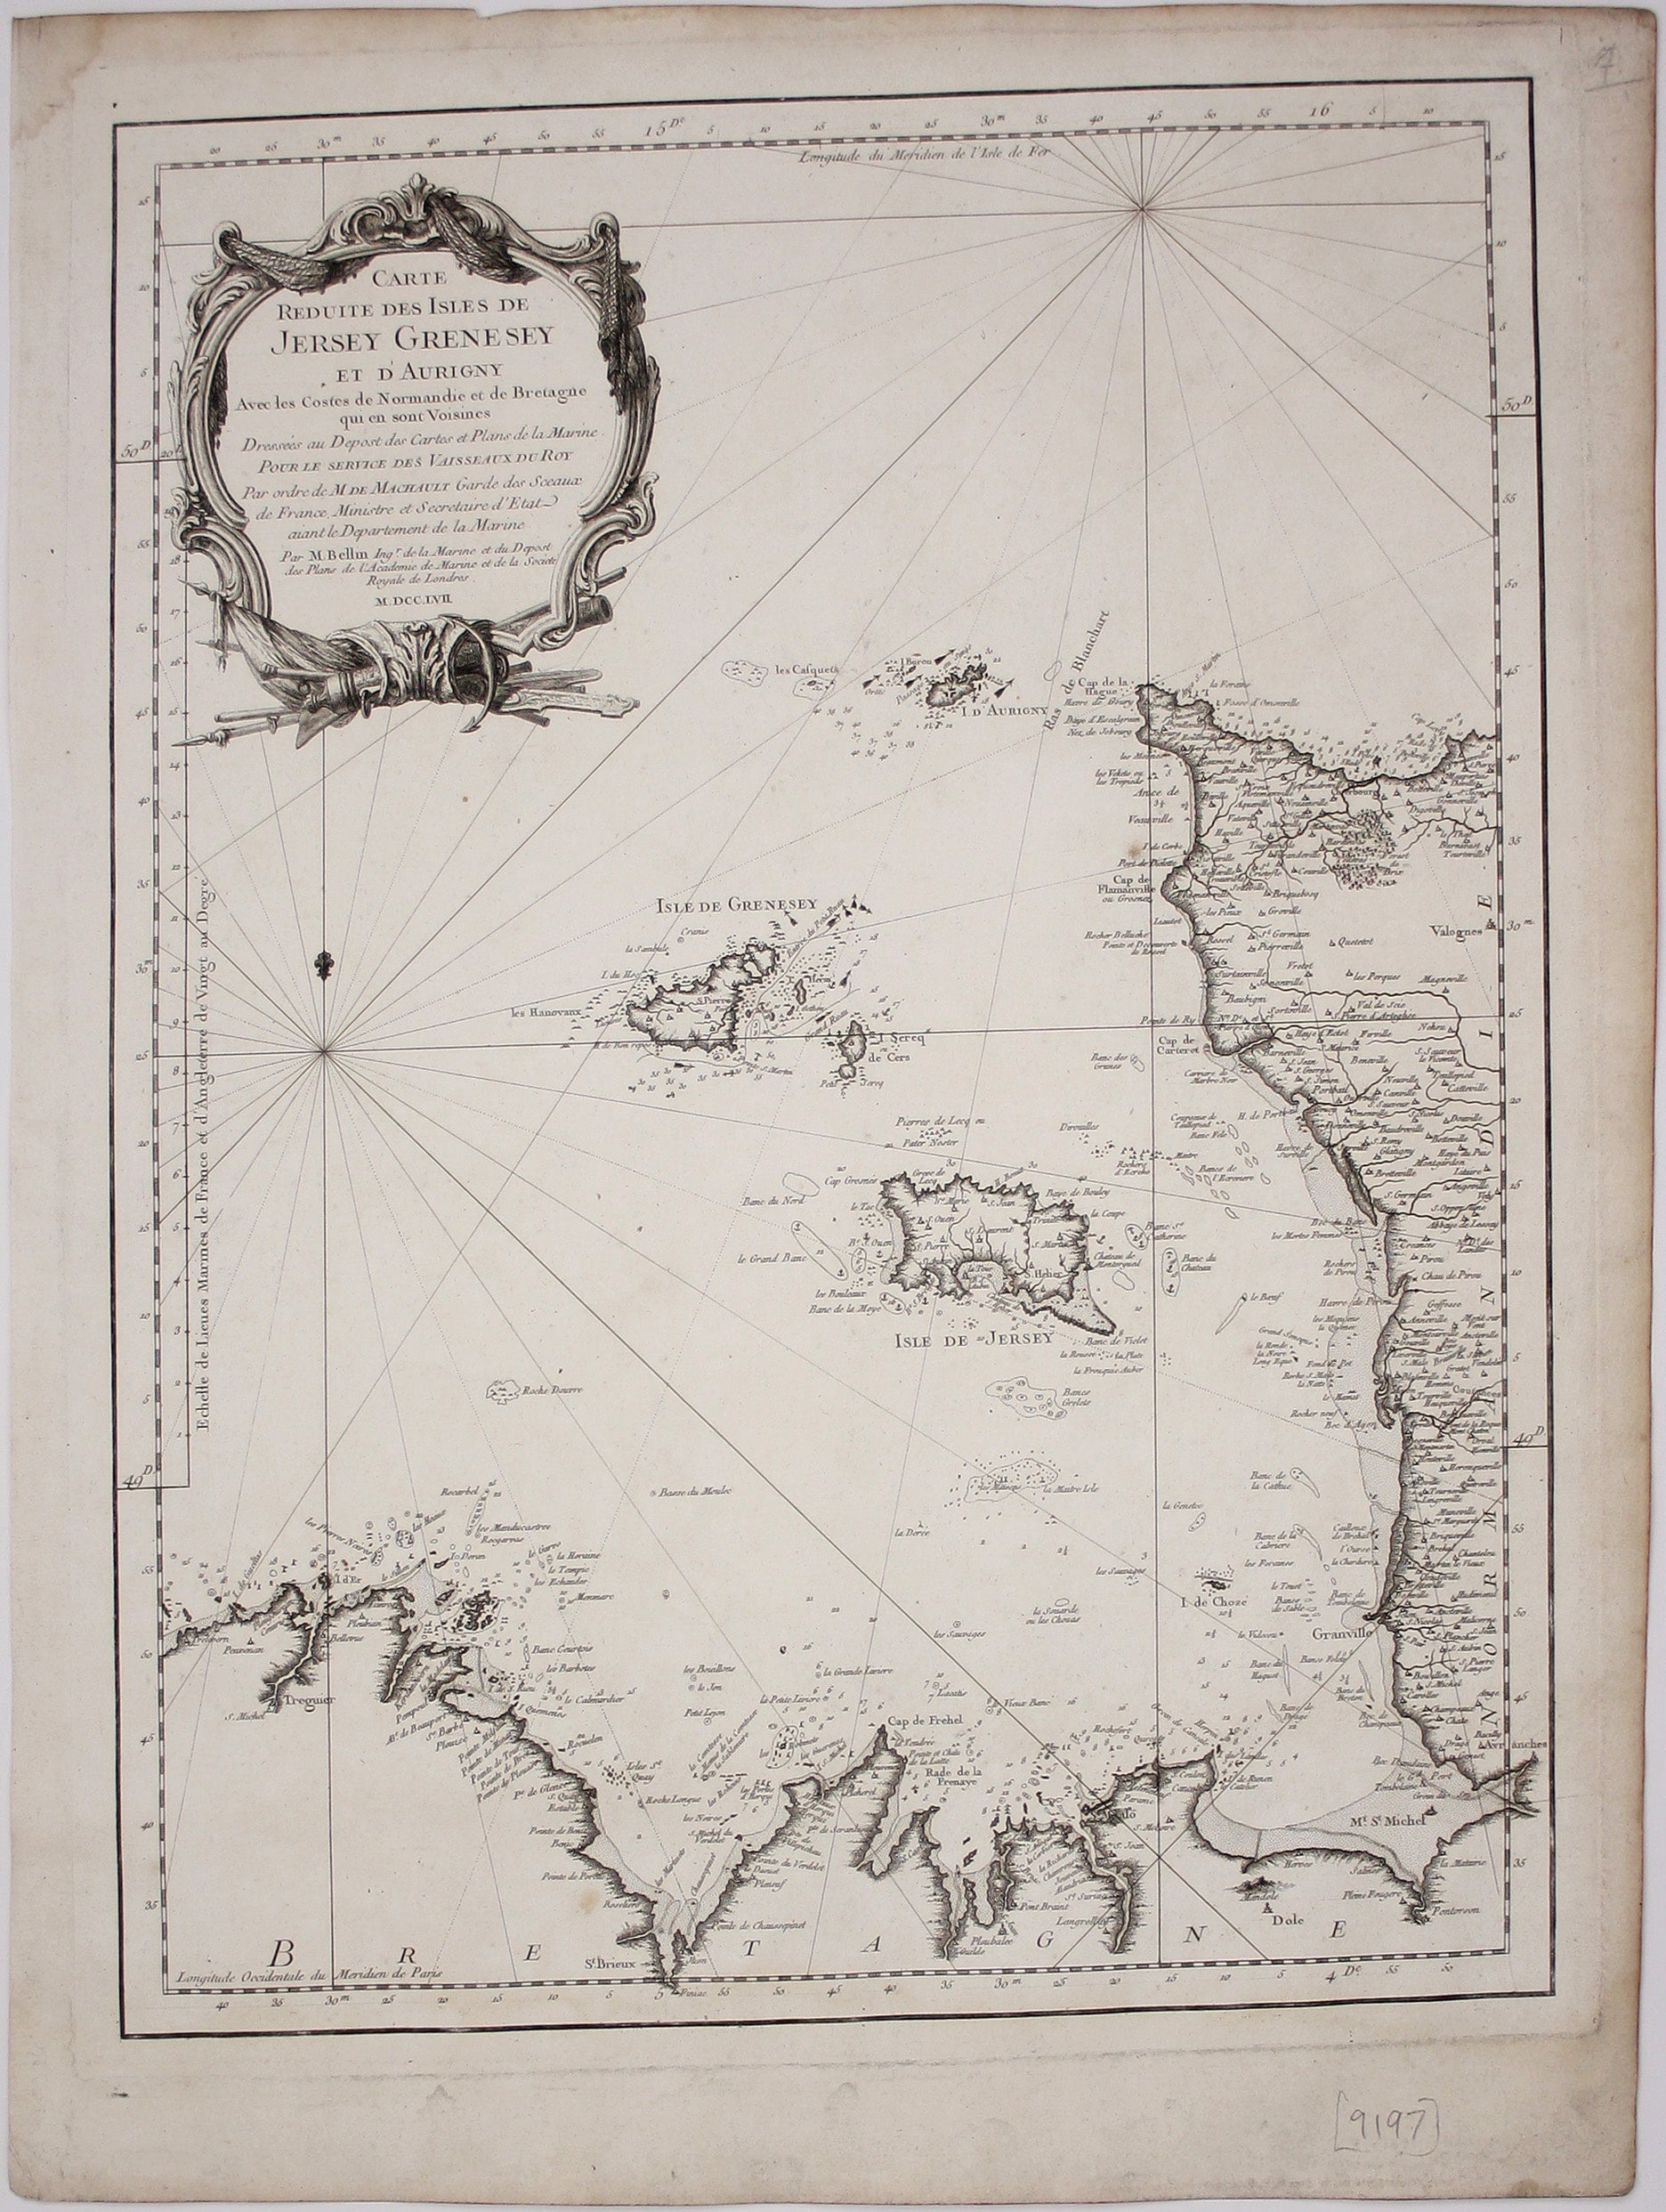 Bellin’s Chart of the Channel Islands